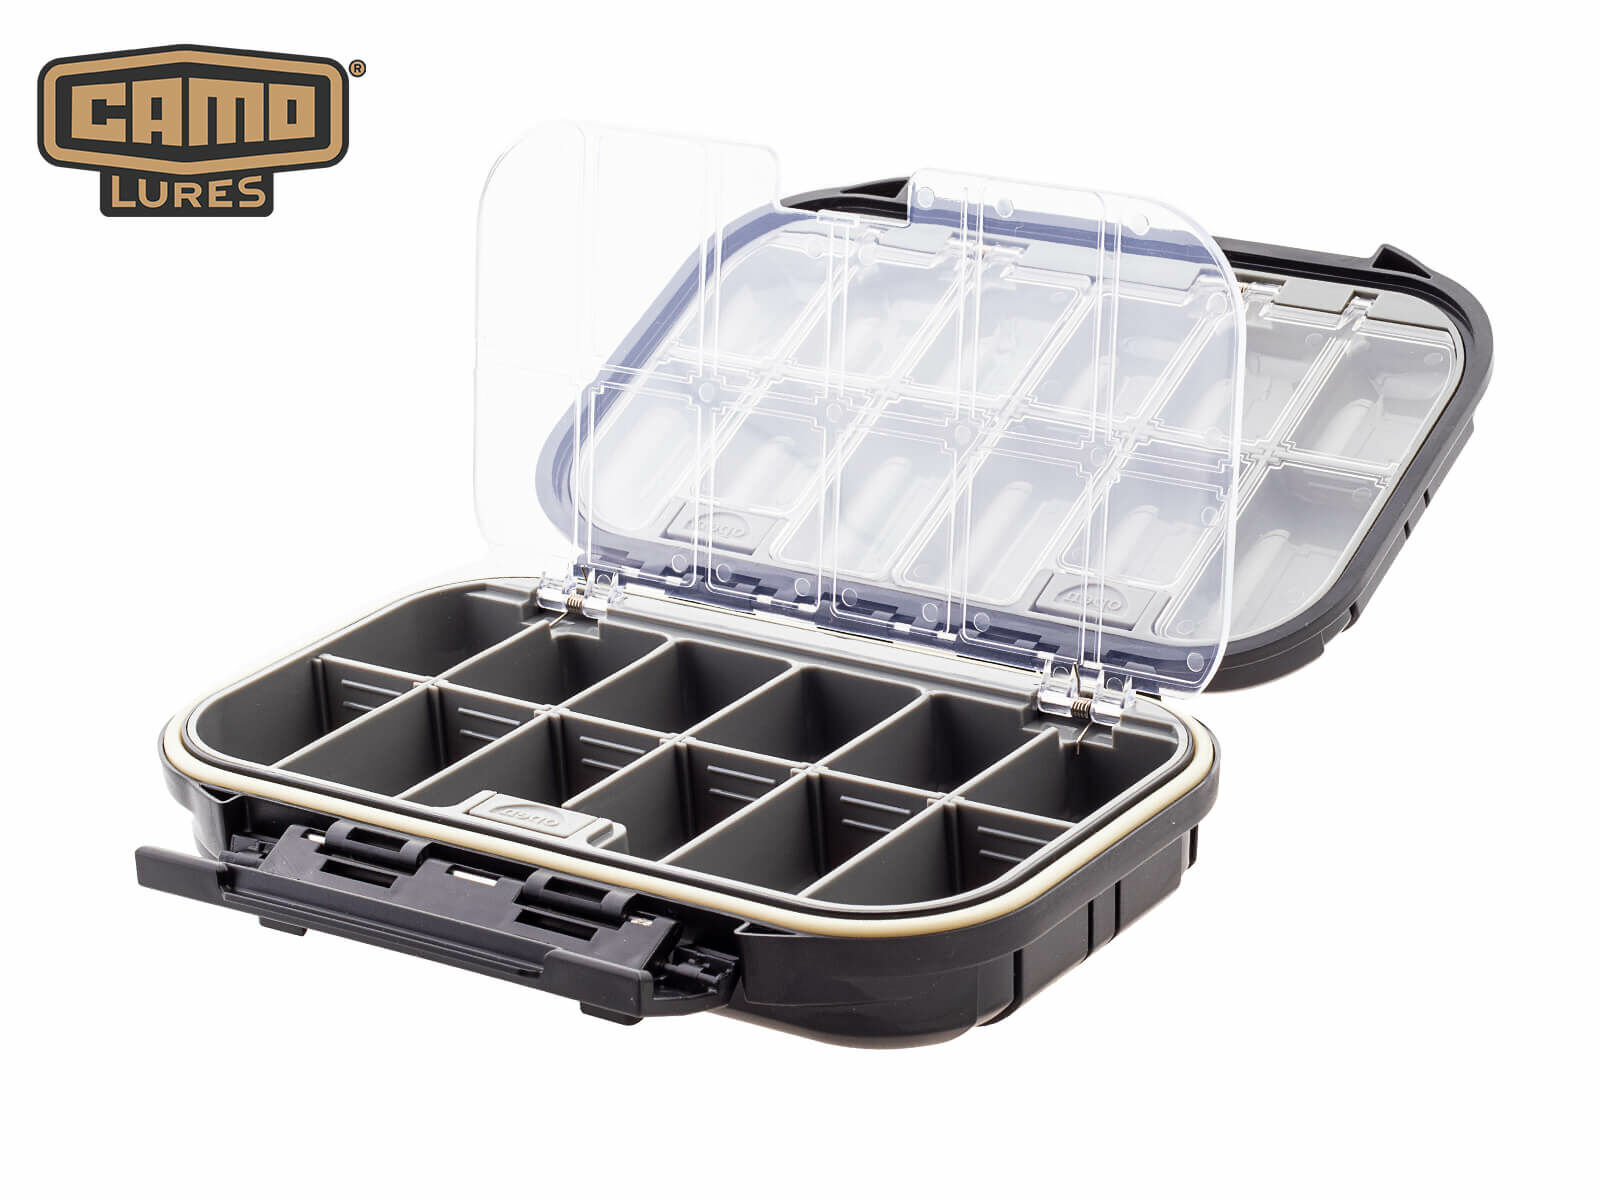 Yoone Buckle Closure Clear Cover Lightweight Fishing Tackle Box 1